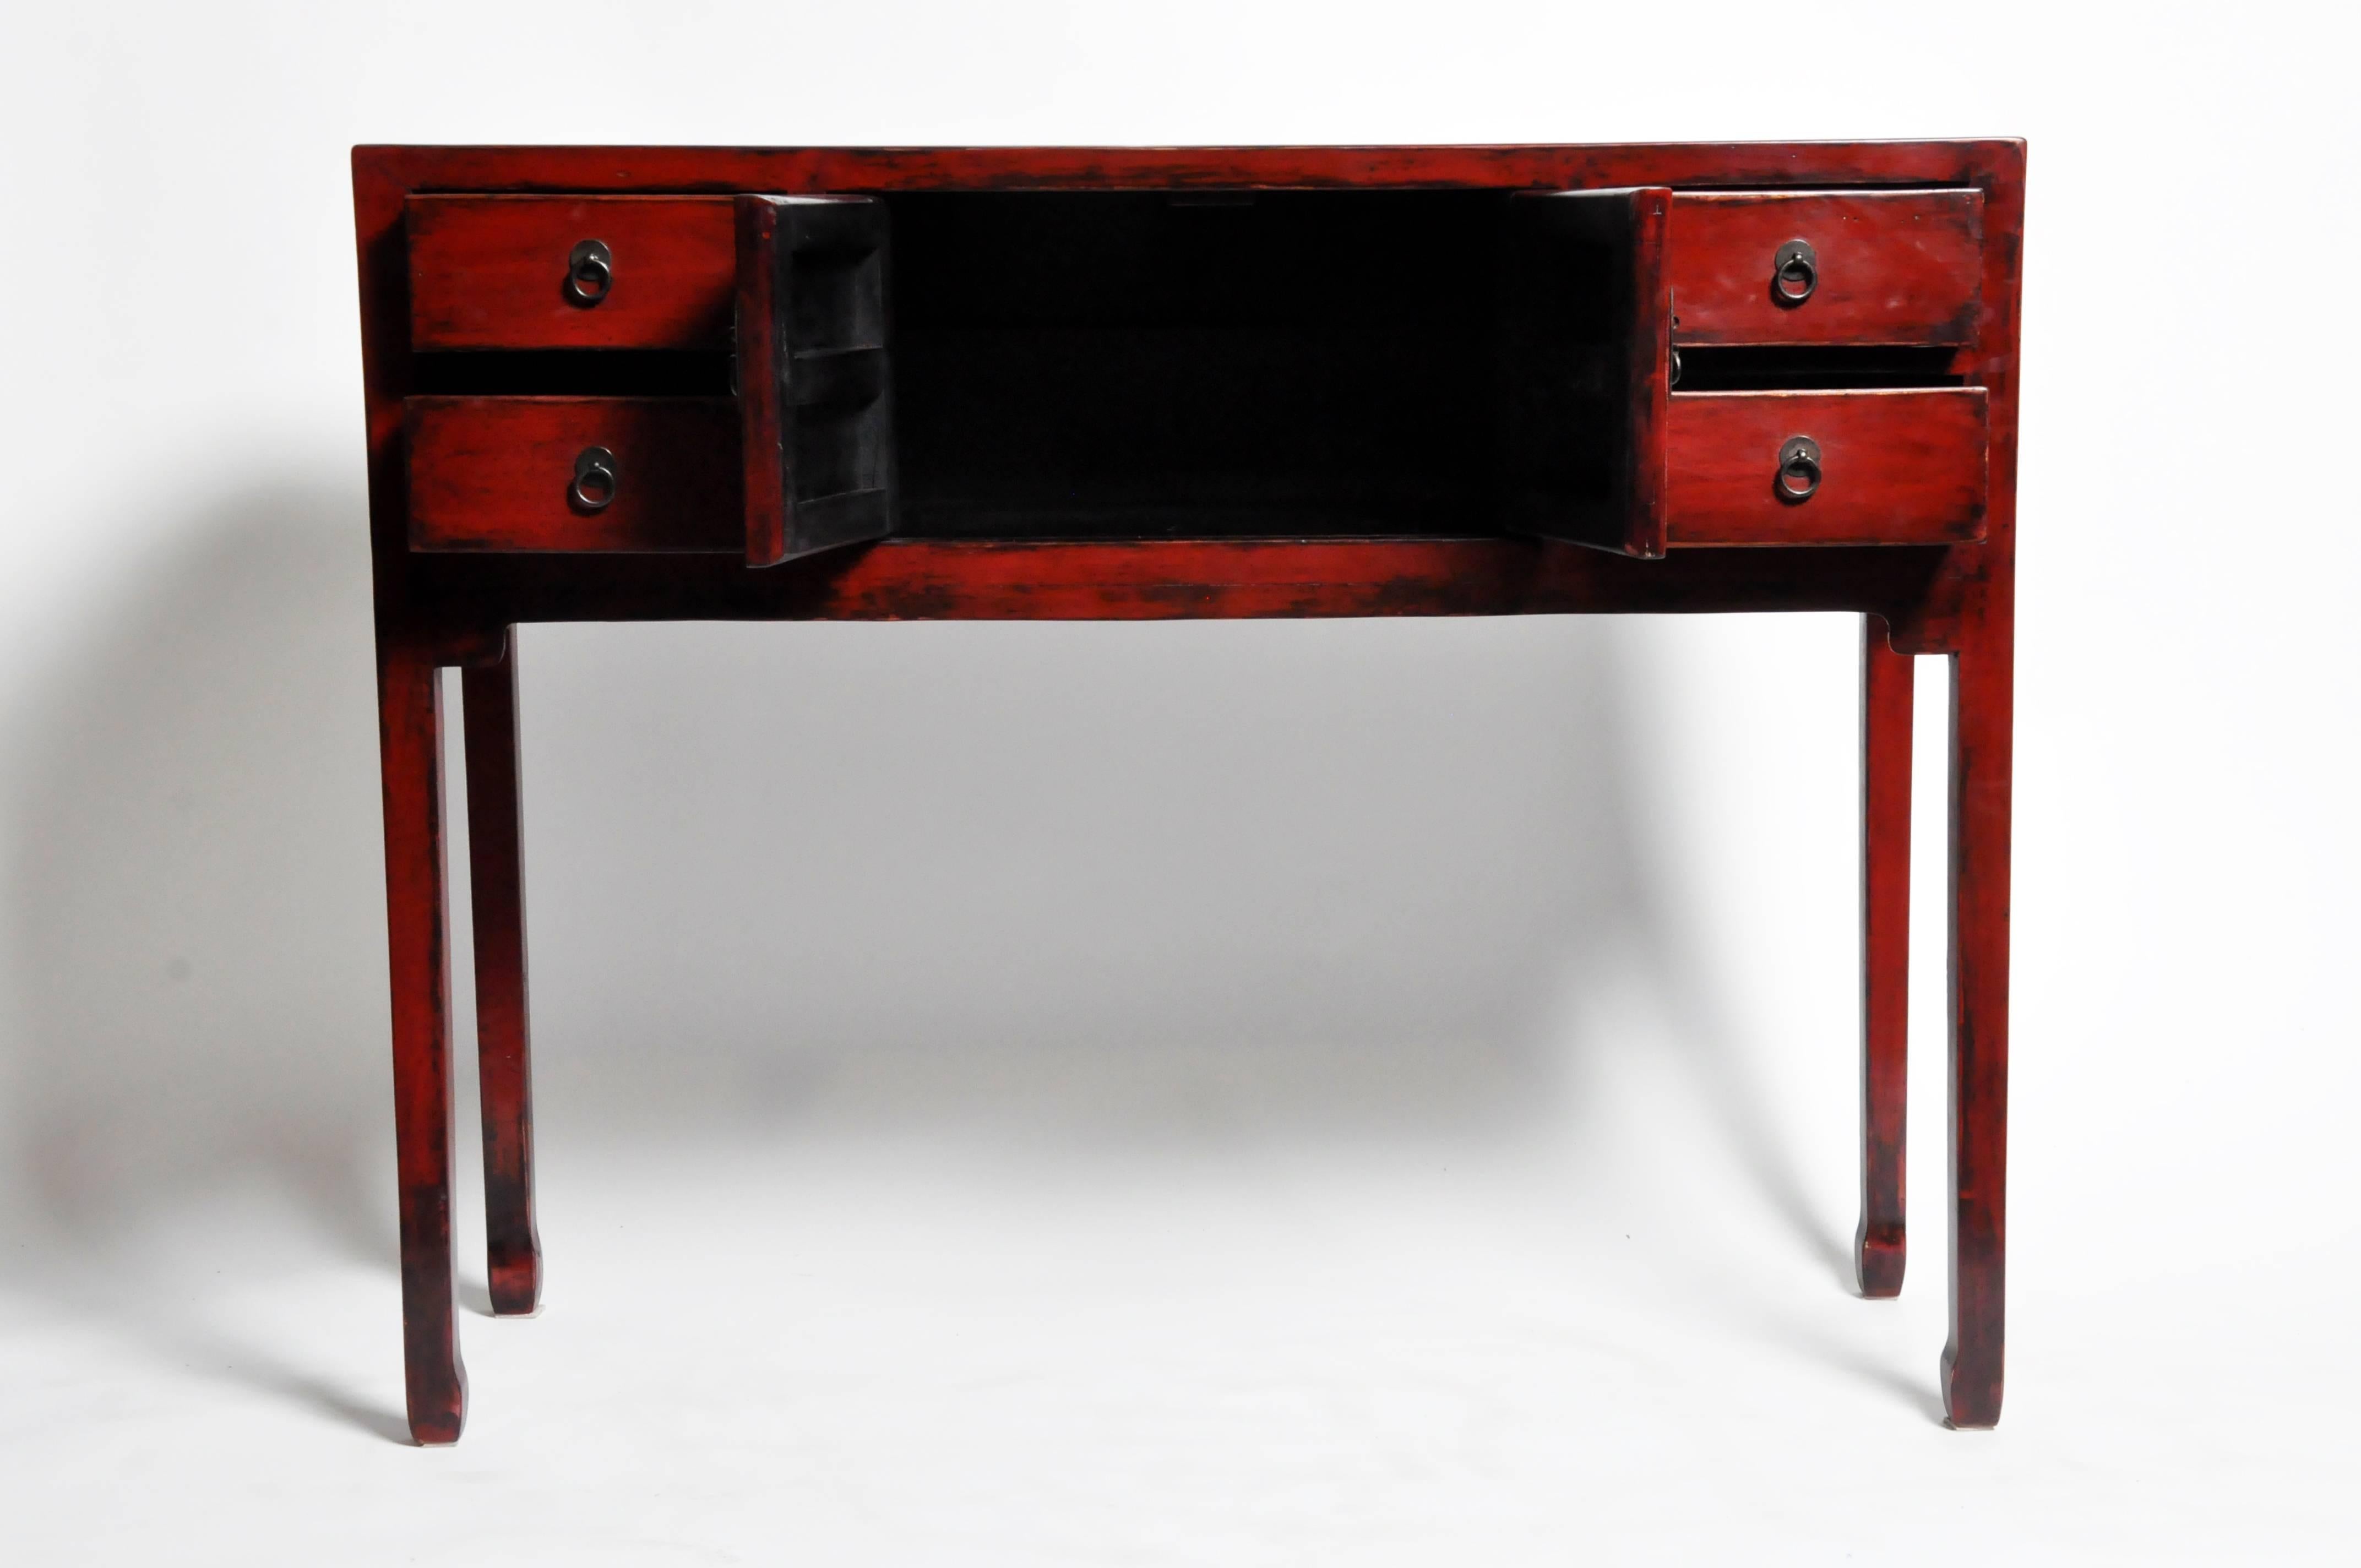 Contemporary Red-Lacquered Chinese Console Table with Four Drawers